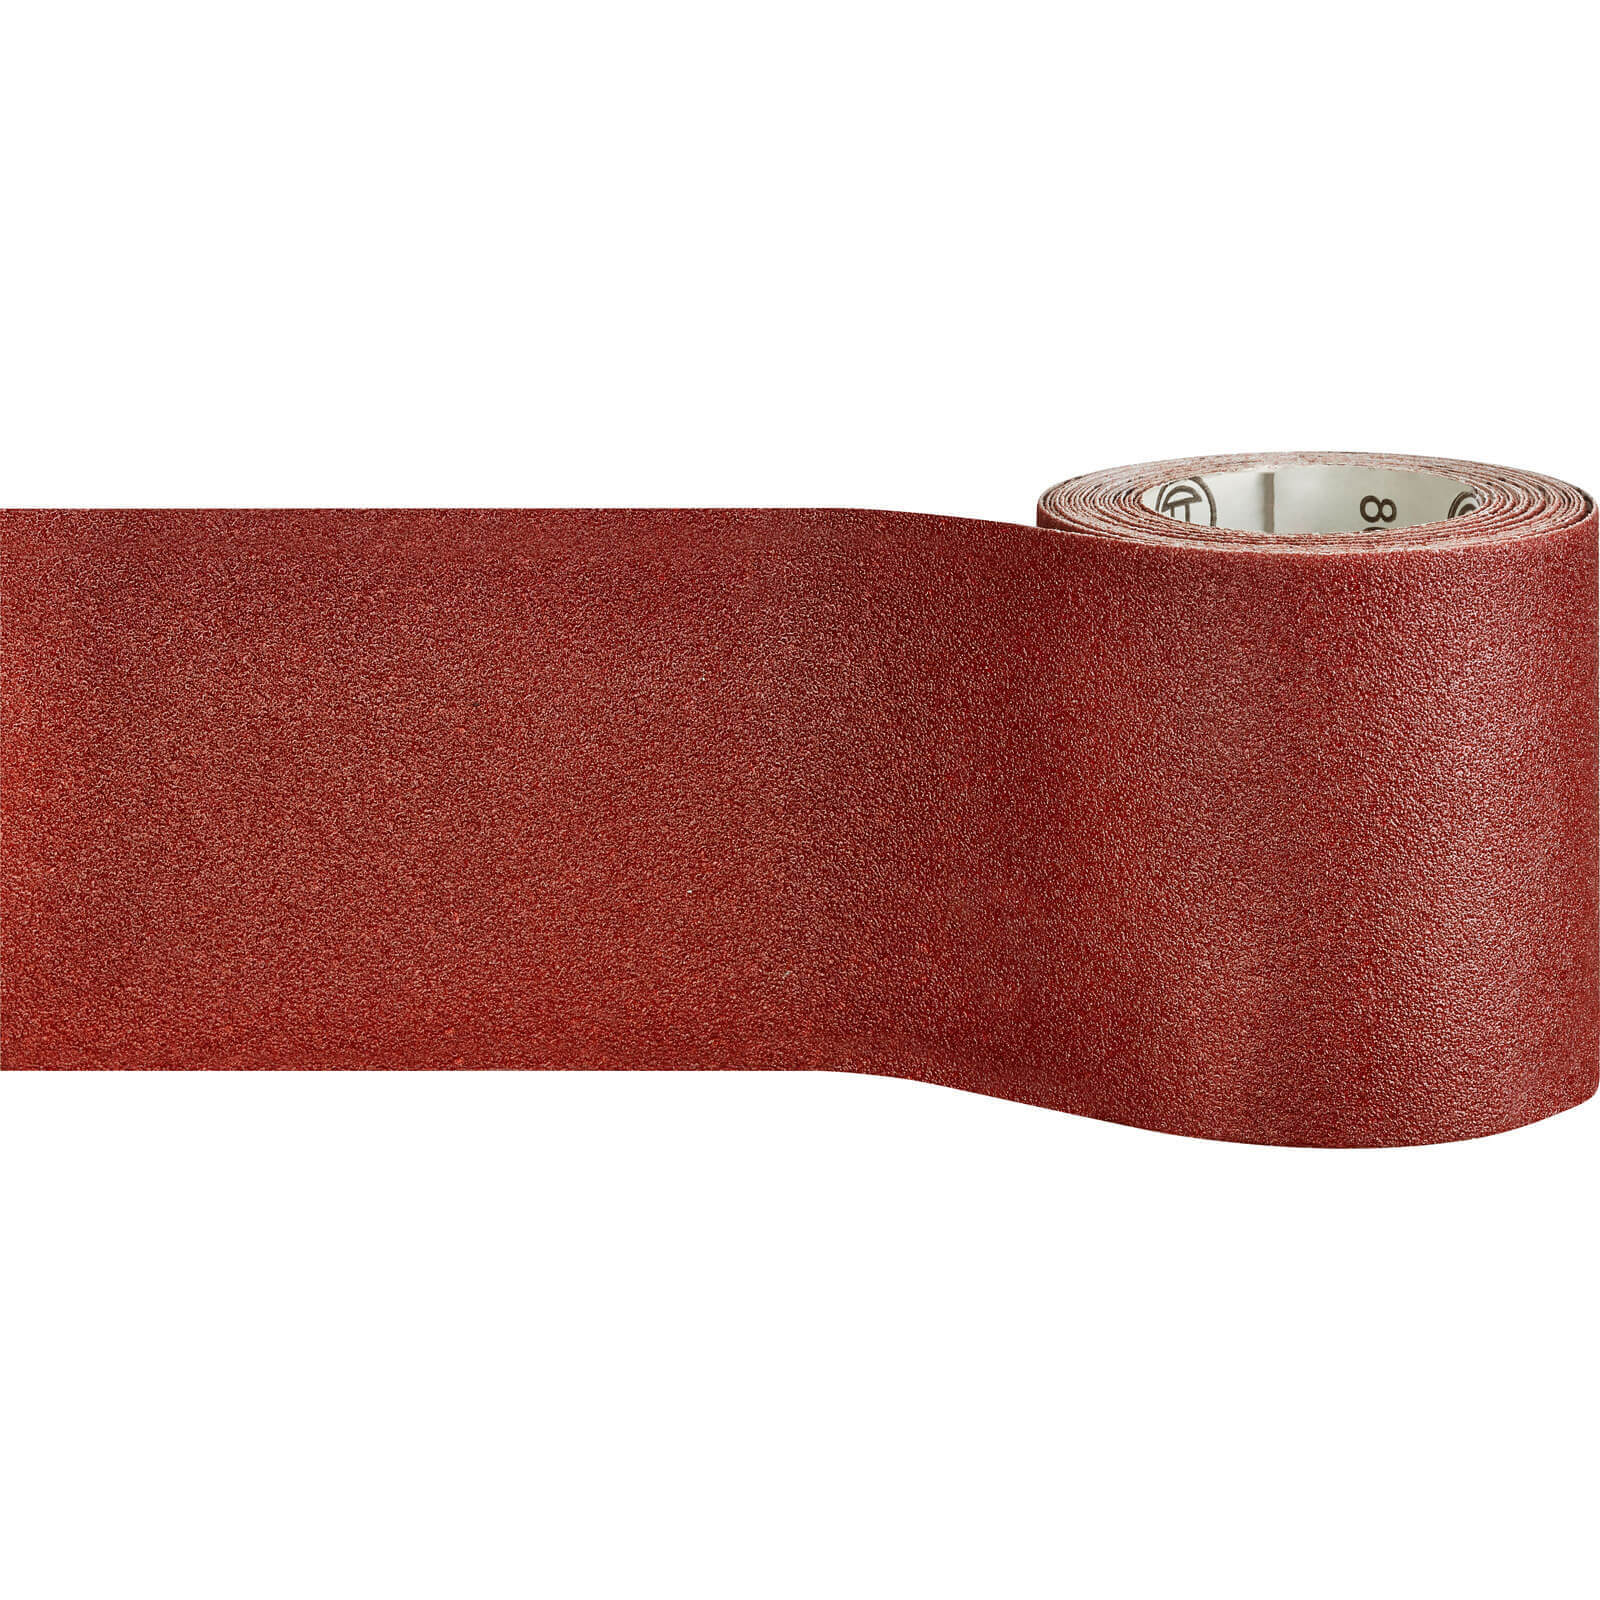 Image of Bosch Sanding Roll Red for Wood 115mm 5m 180g